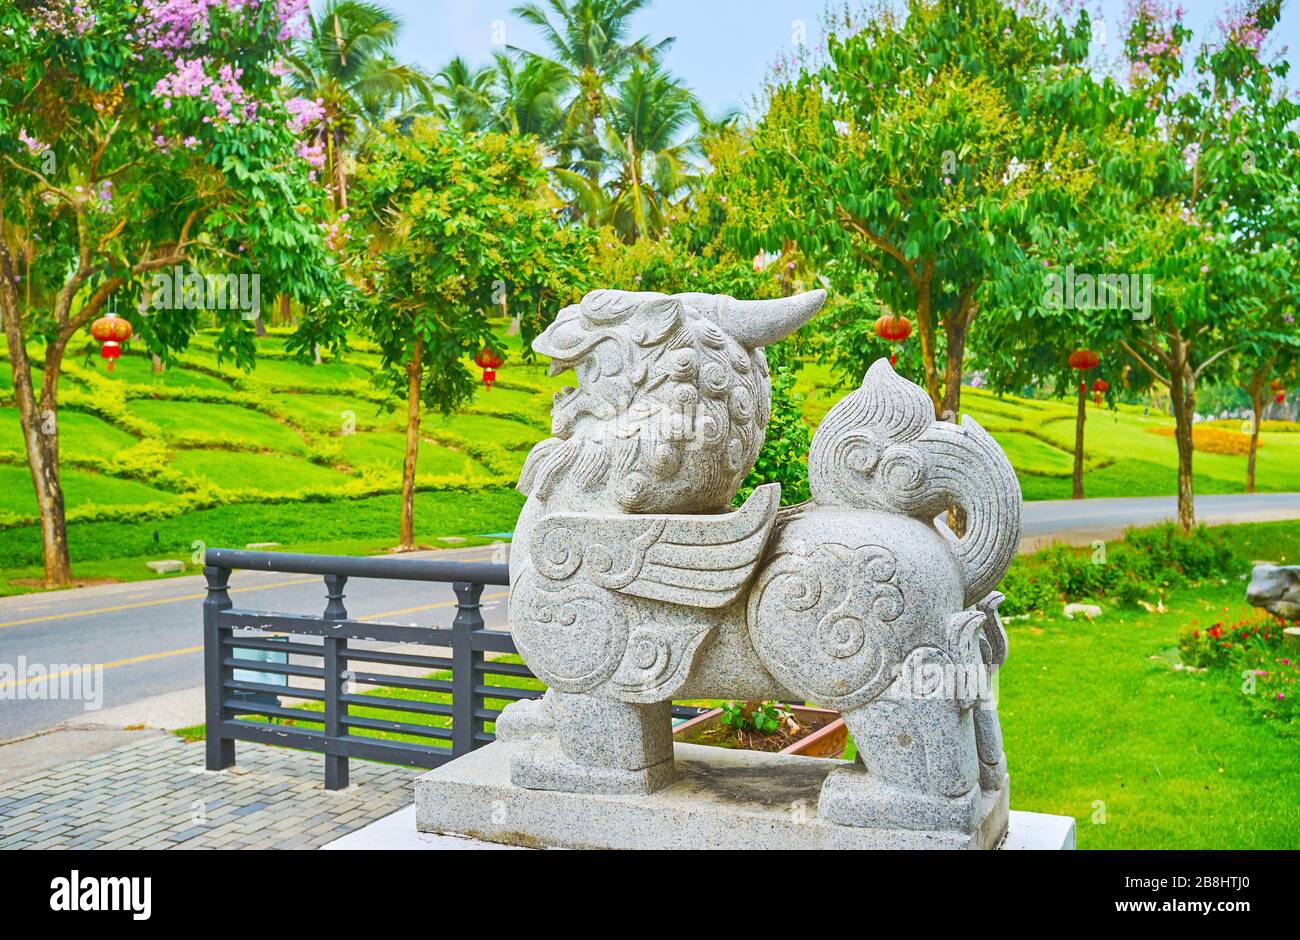 The carved stone sculpture of Pixiu - traditional Chinese mythic creature, partly lion and partly dragon, located at the China garden of Rajapruek par Stock Photo